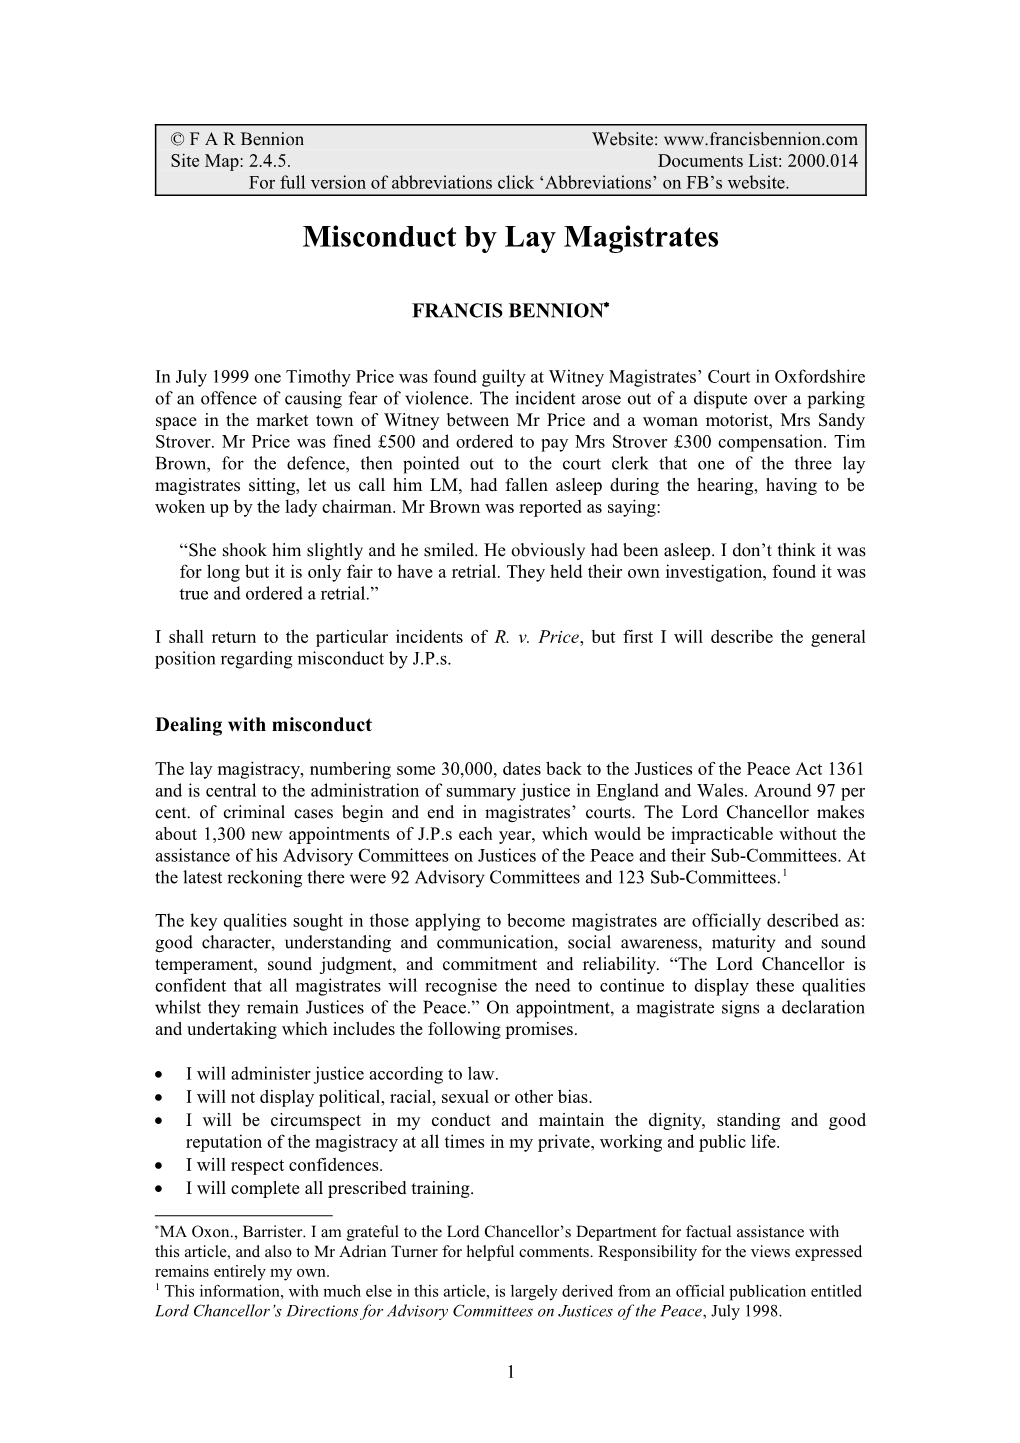 Misconduct by Lay Magistrates